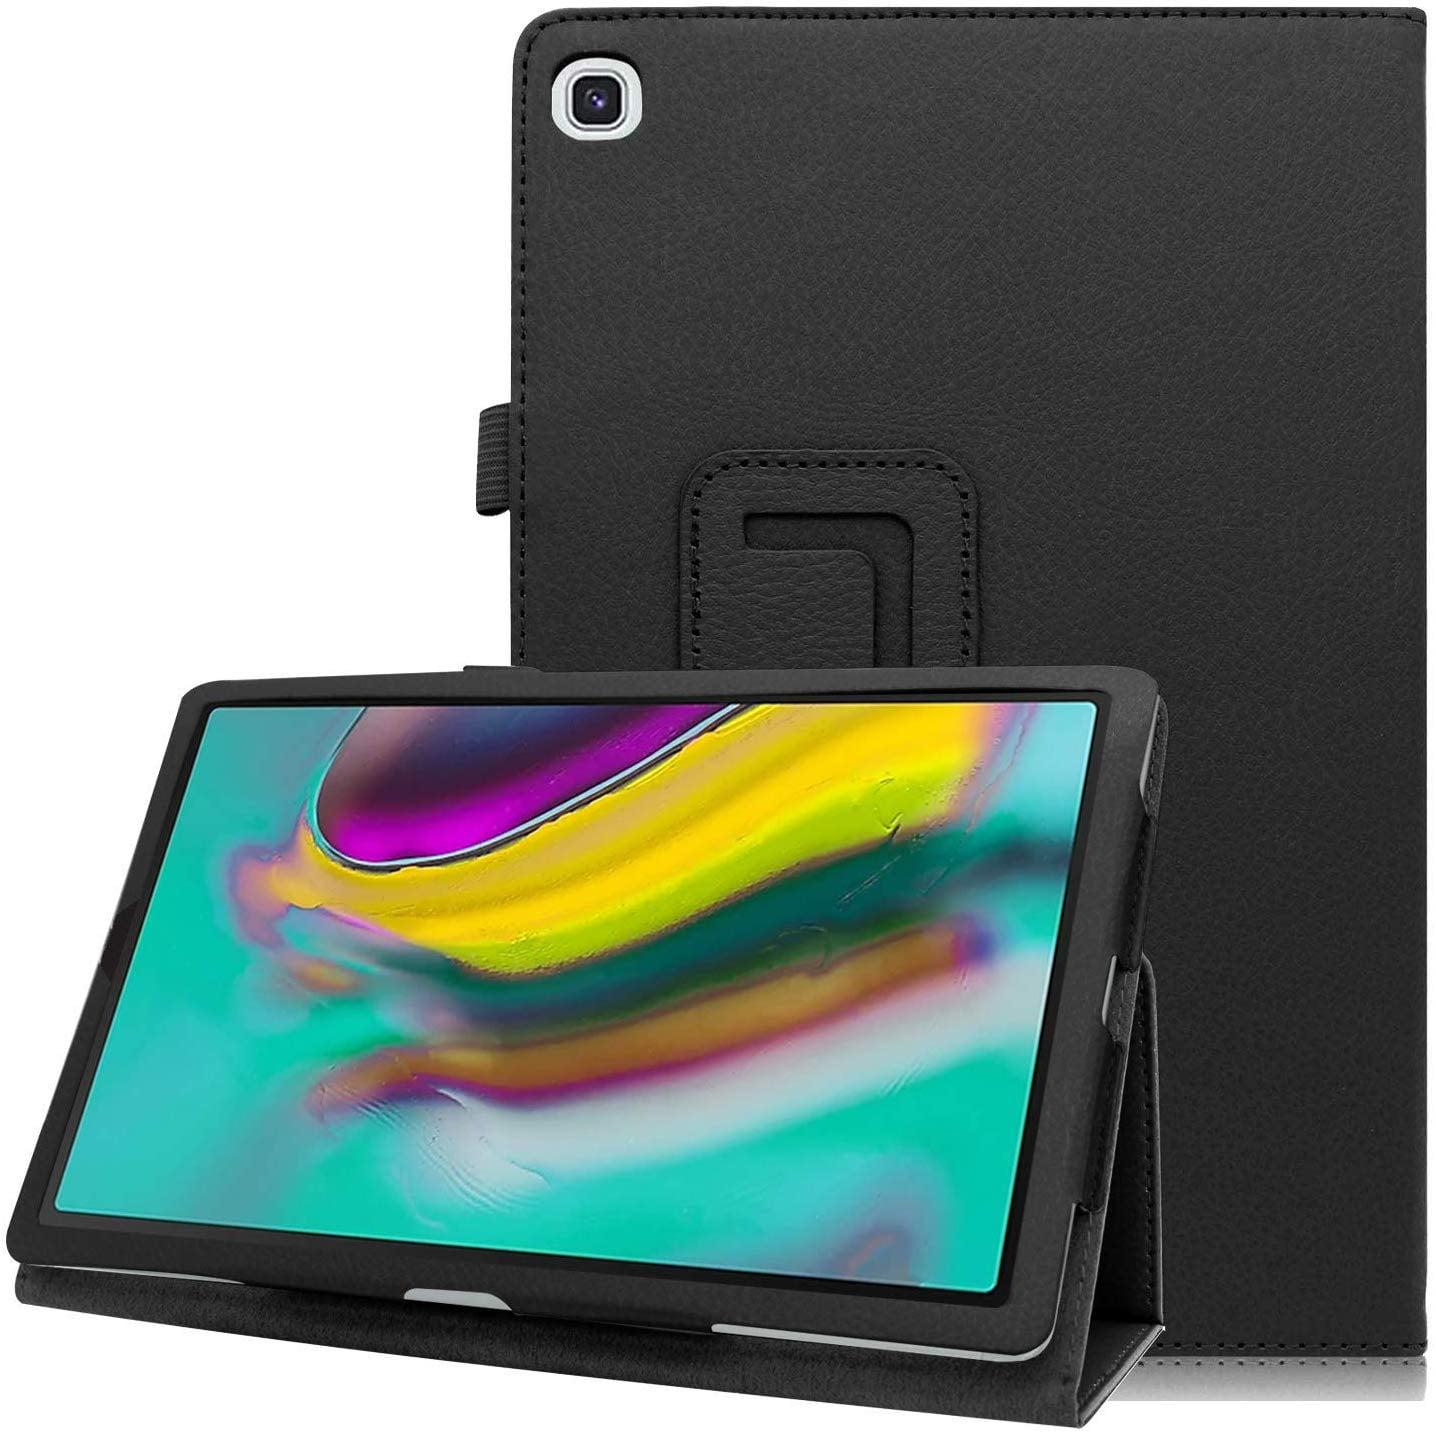 Full Cover Screen Protector Case Cover for Samsung Galaxy Tab A 10.1 T510/T515 